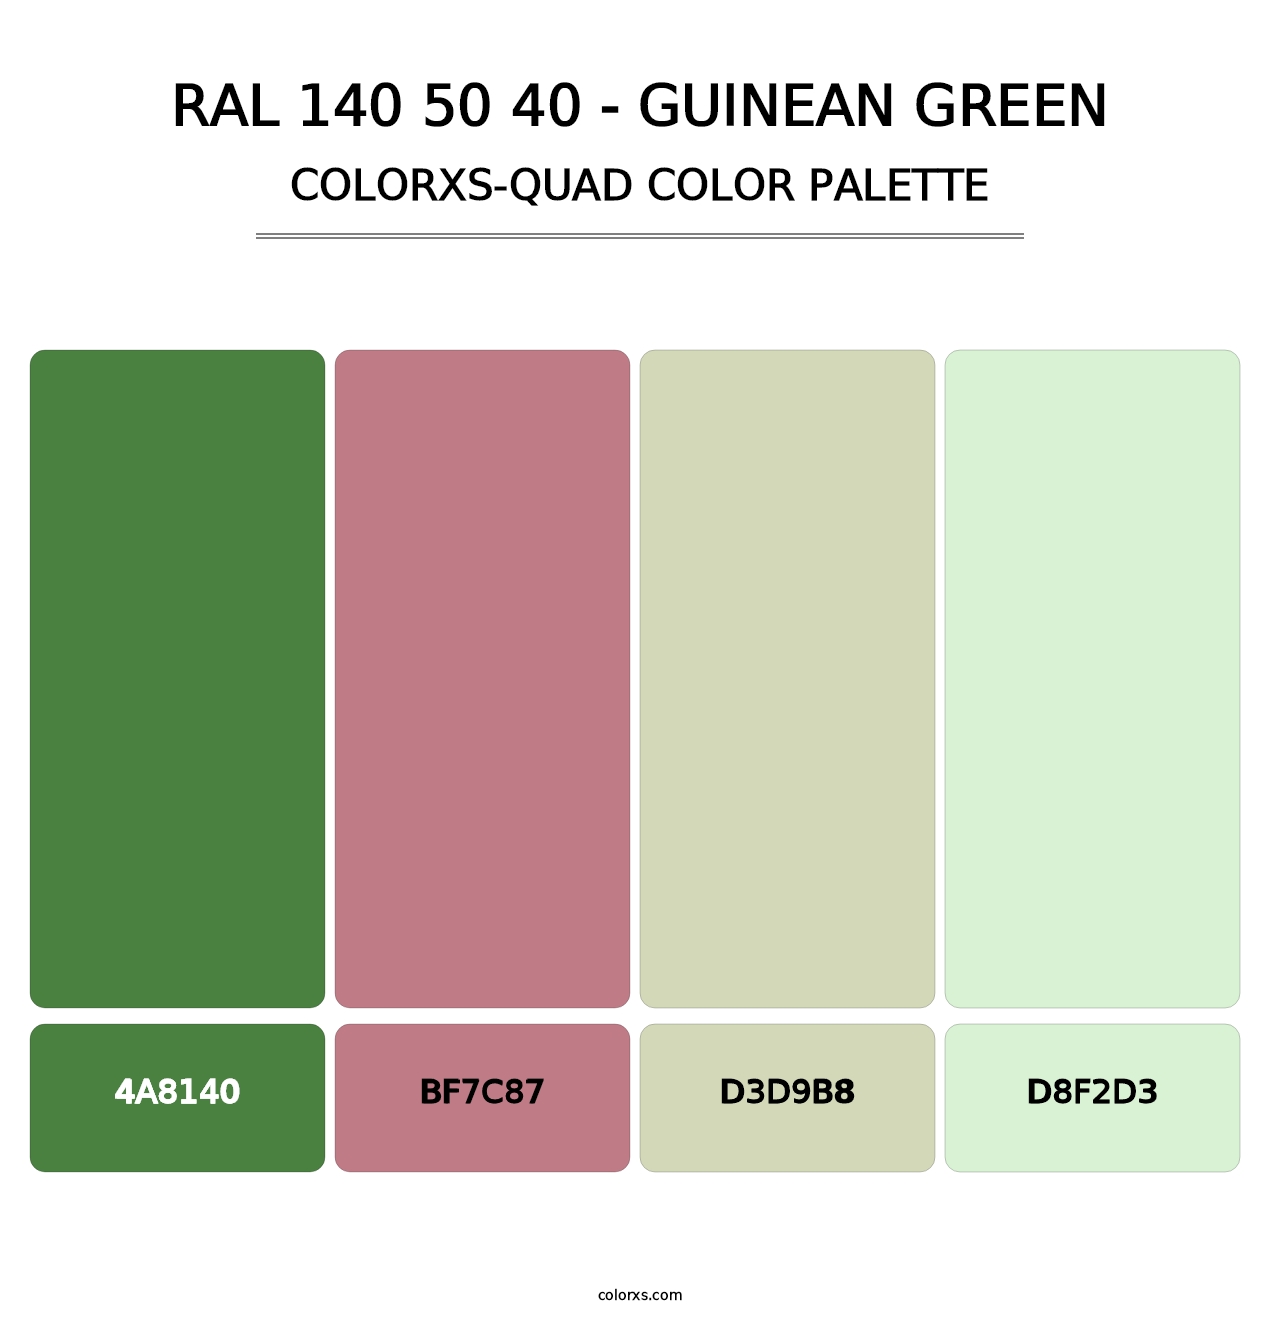 RAL 140 50 40 - Guinean Green - Colorxs Quad Palette